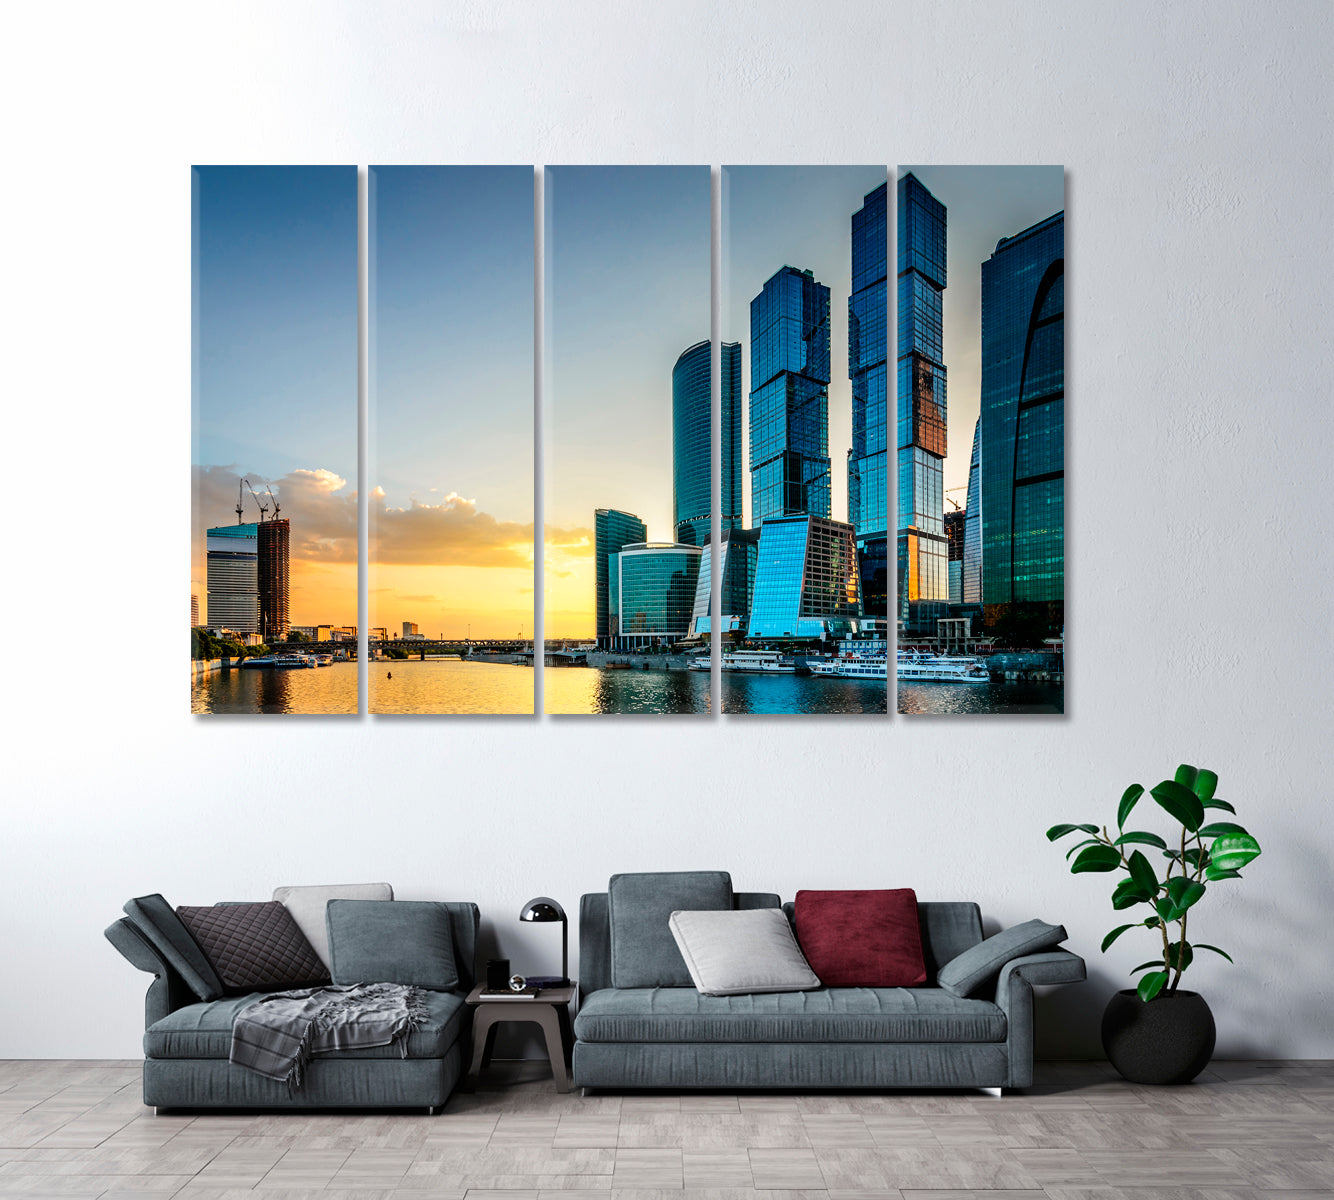 Moscow City Skyscrapers Canvas Print ArtLexy 5 Panels 36"x24" inches 